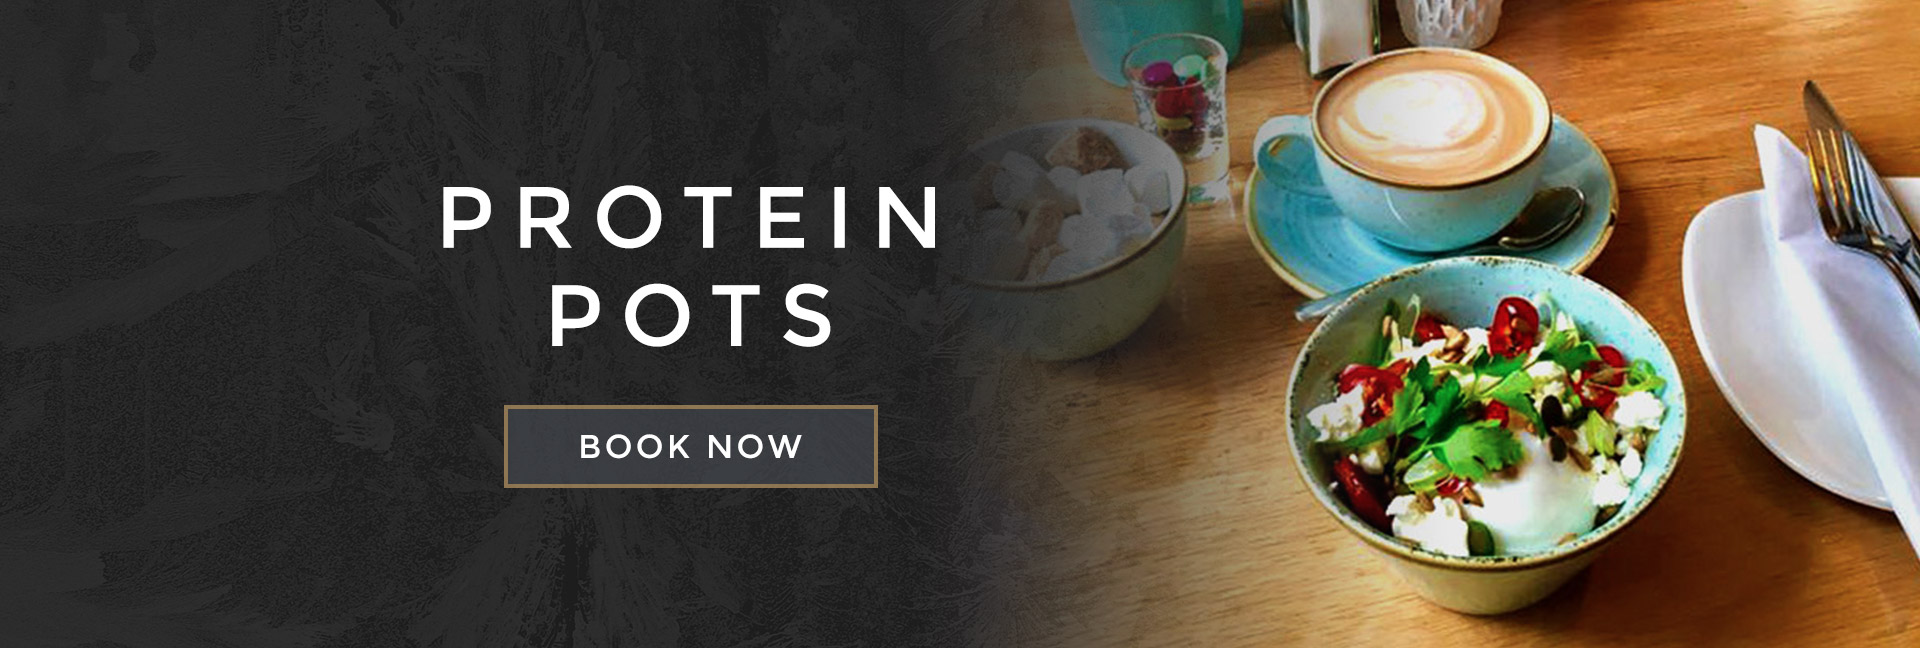 Protein pots at All Bar One York - Book your table